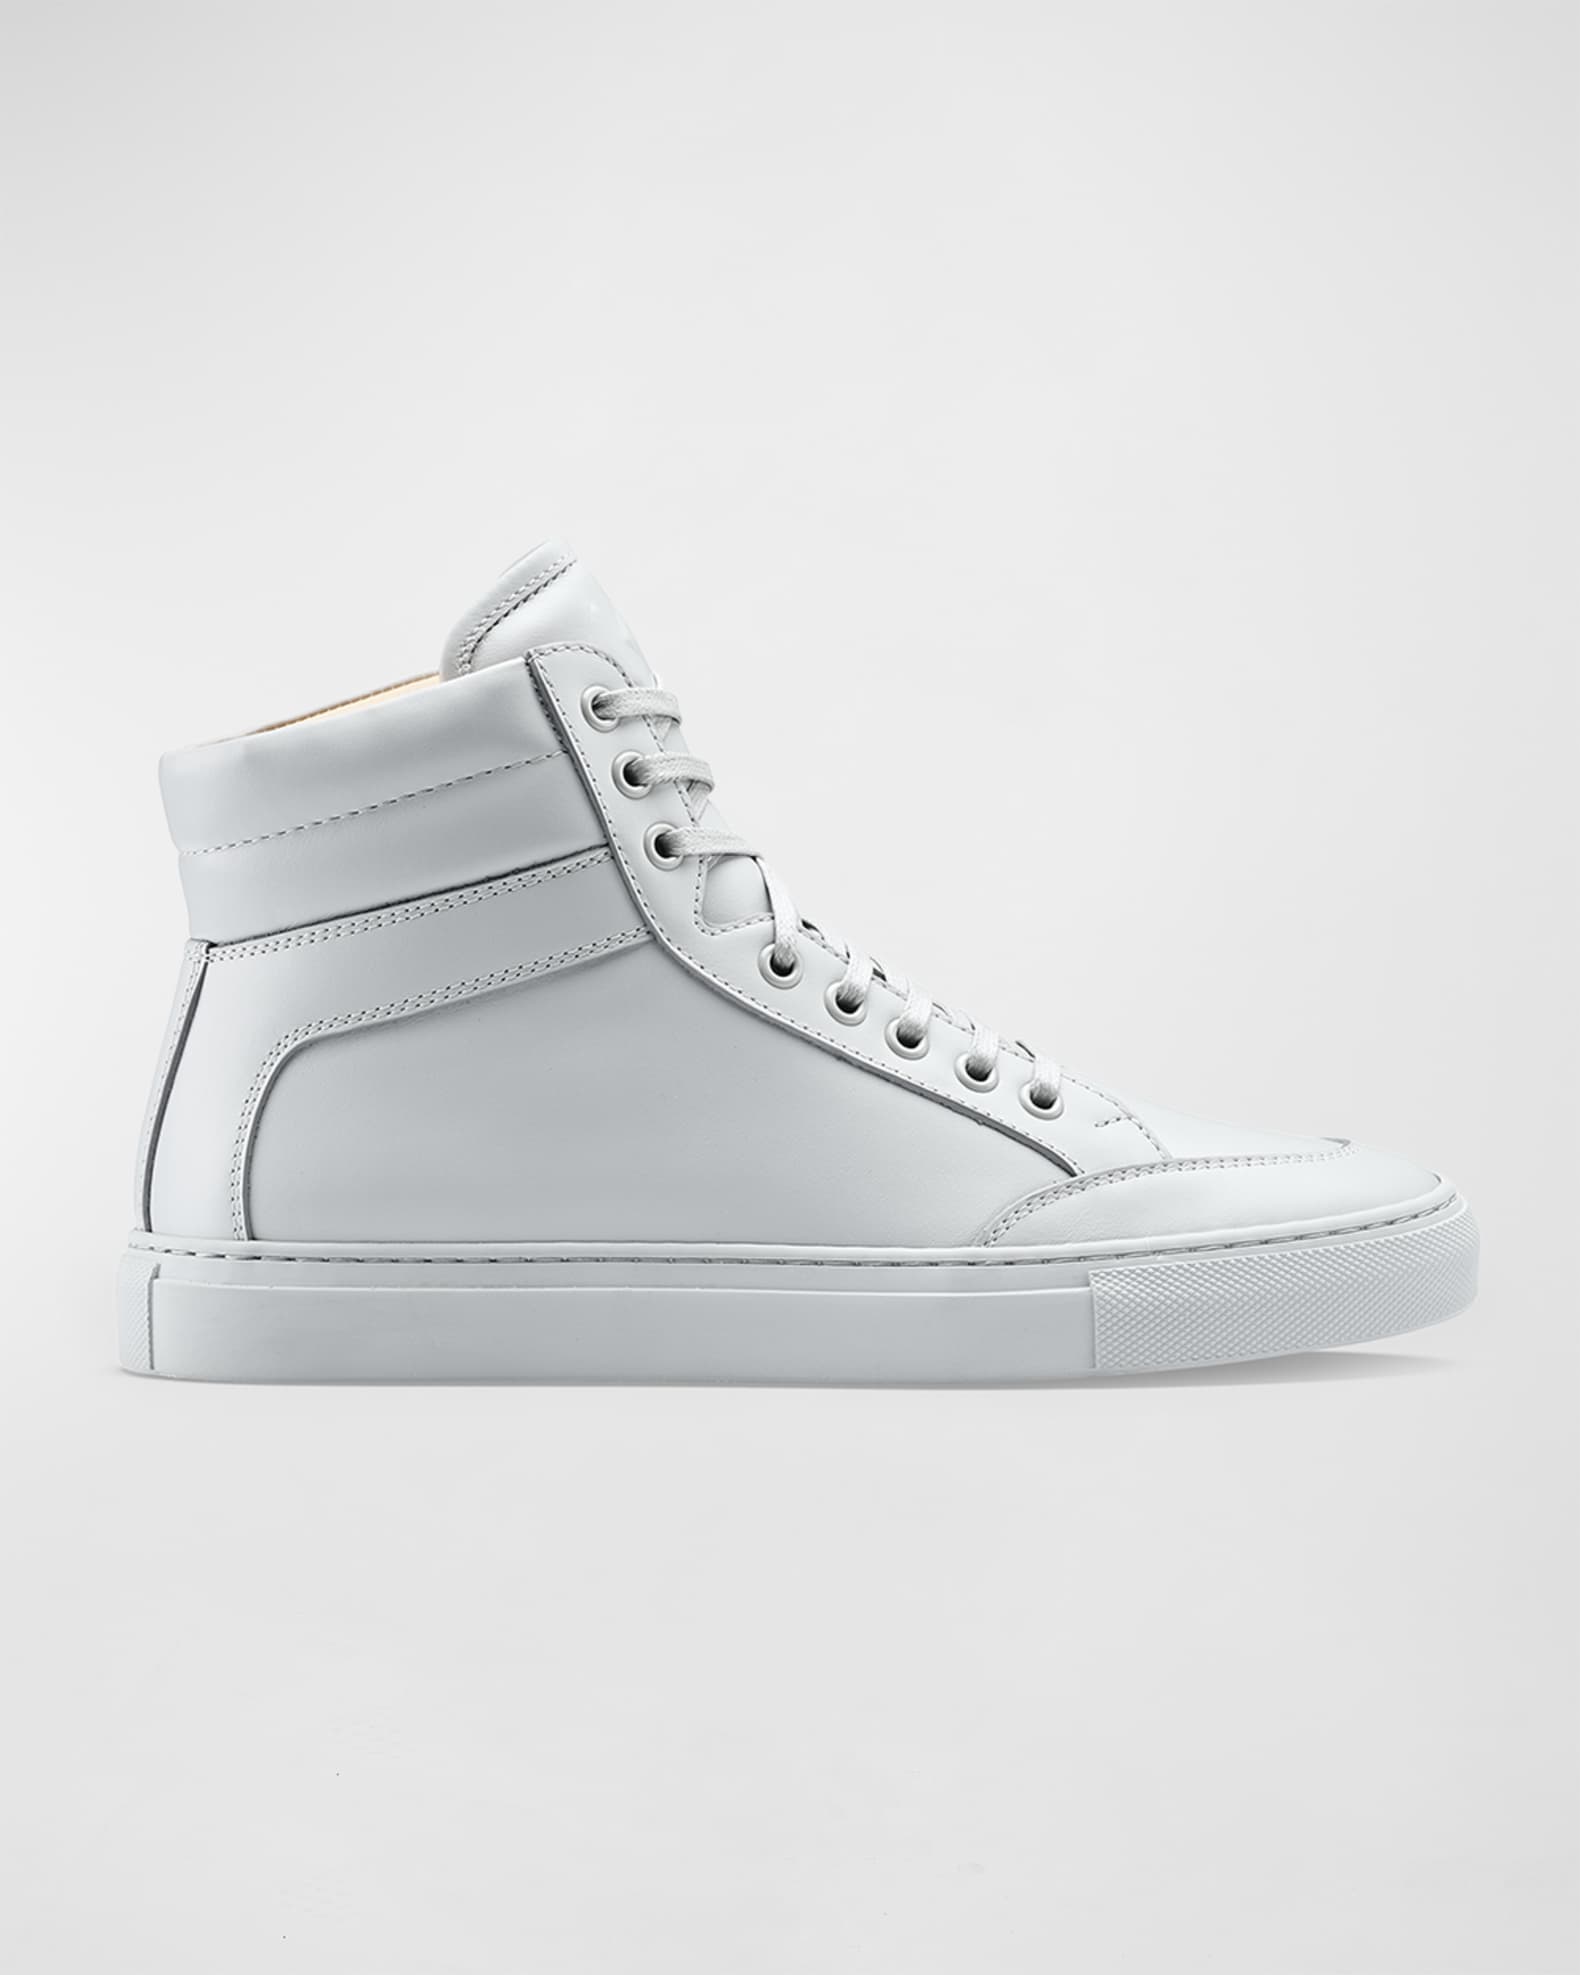 Koio Primo Suede High-Top Sneakers | Neiman Marcus